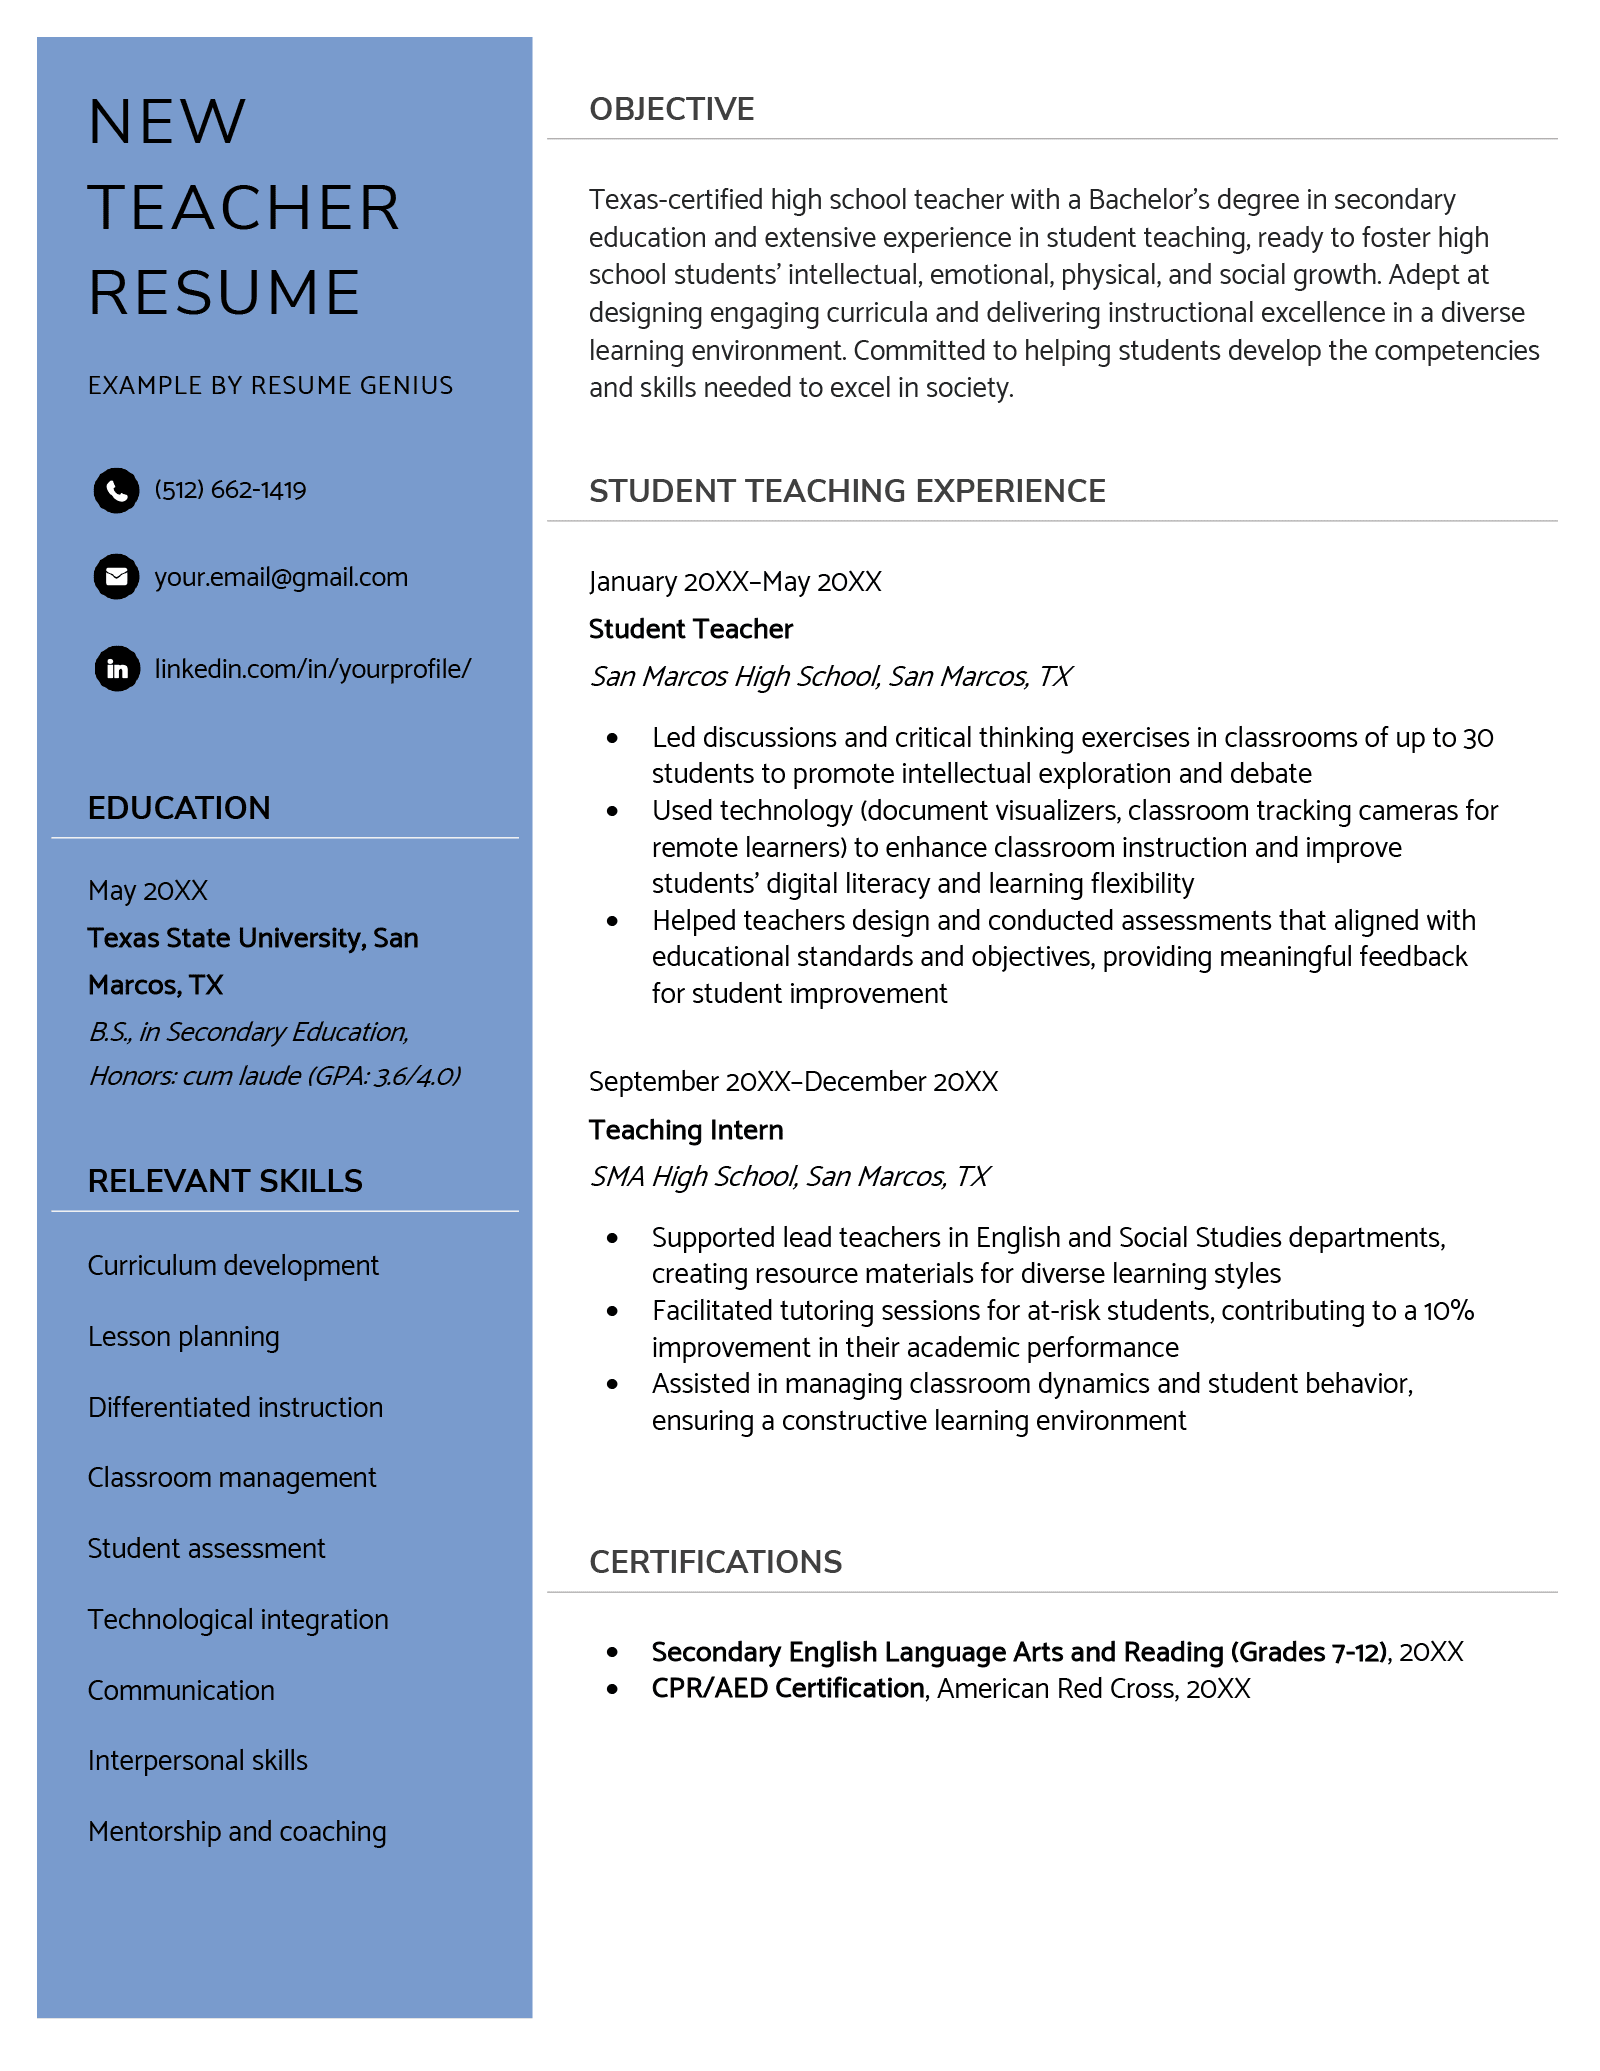 A new teacher resume example with a vertical blue sidebar on the left.